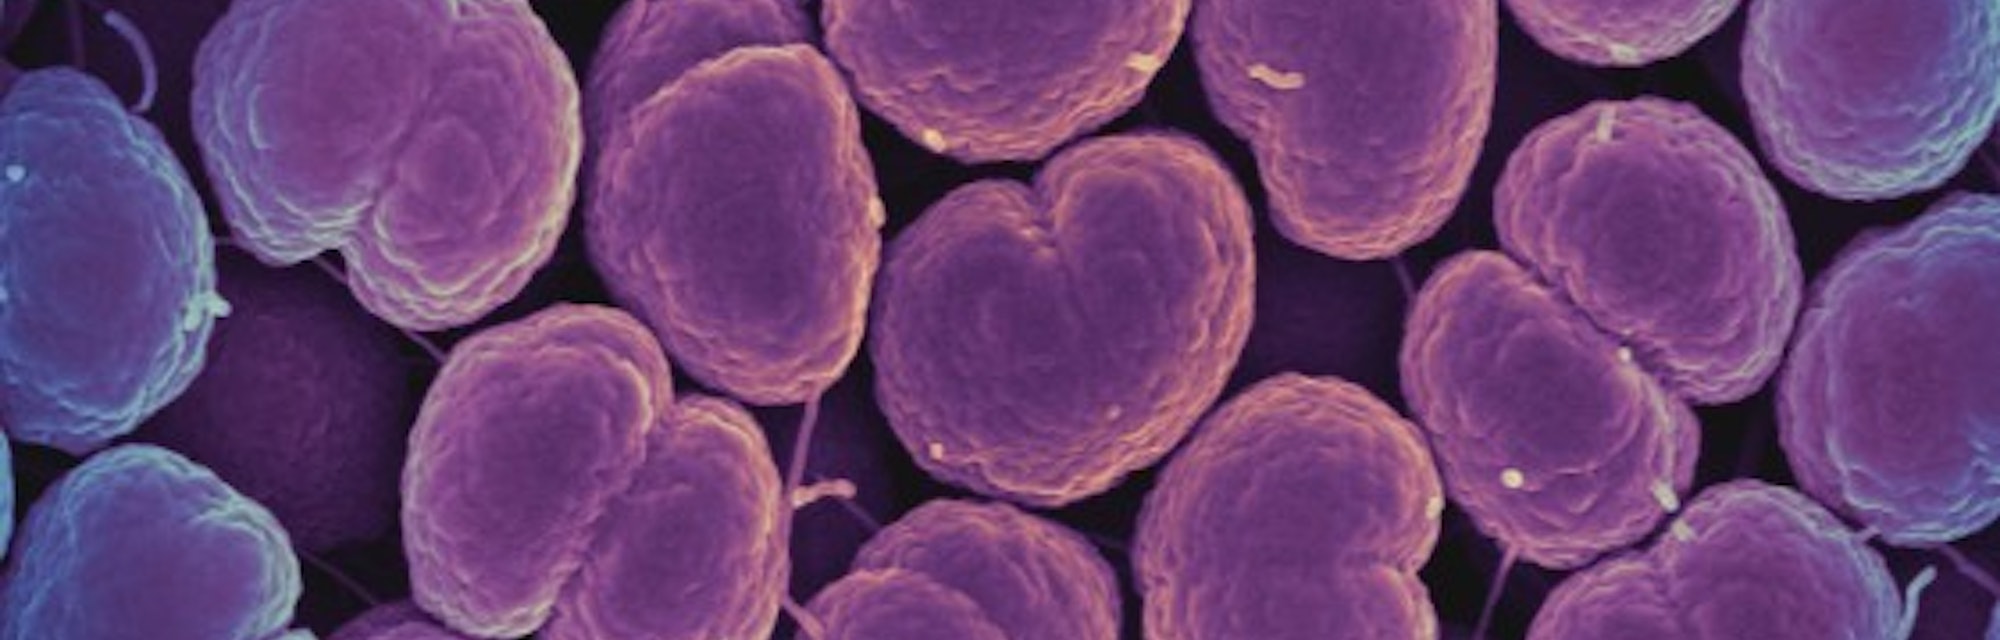 Untreatable gonorrhea: How worried should we be? - Daily 